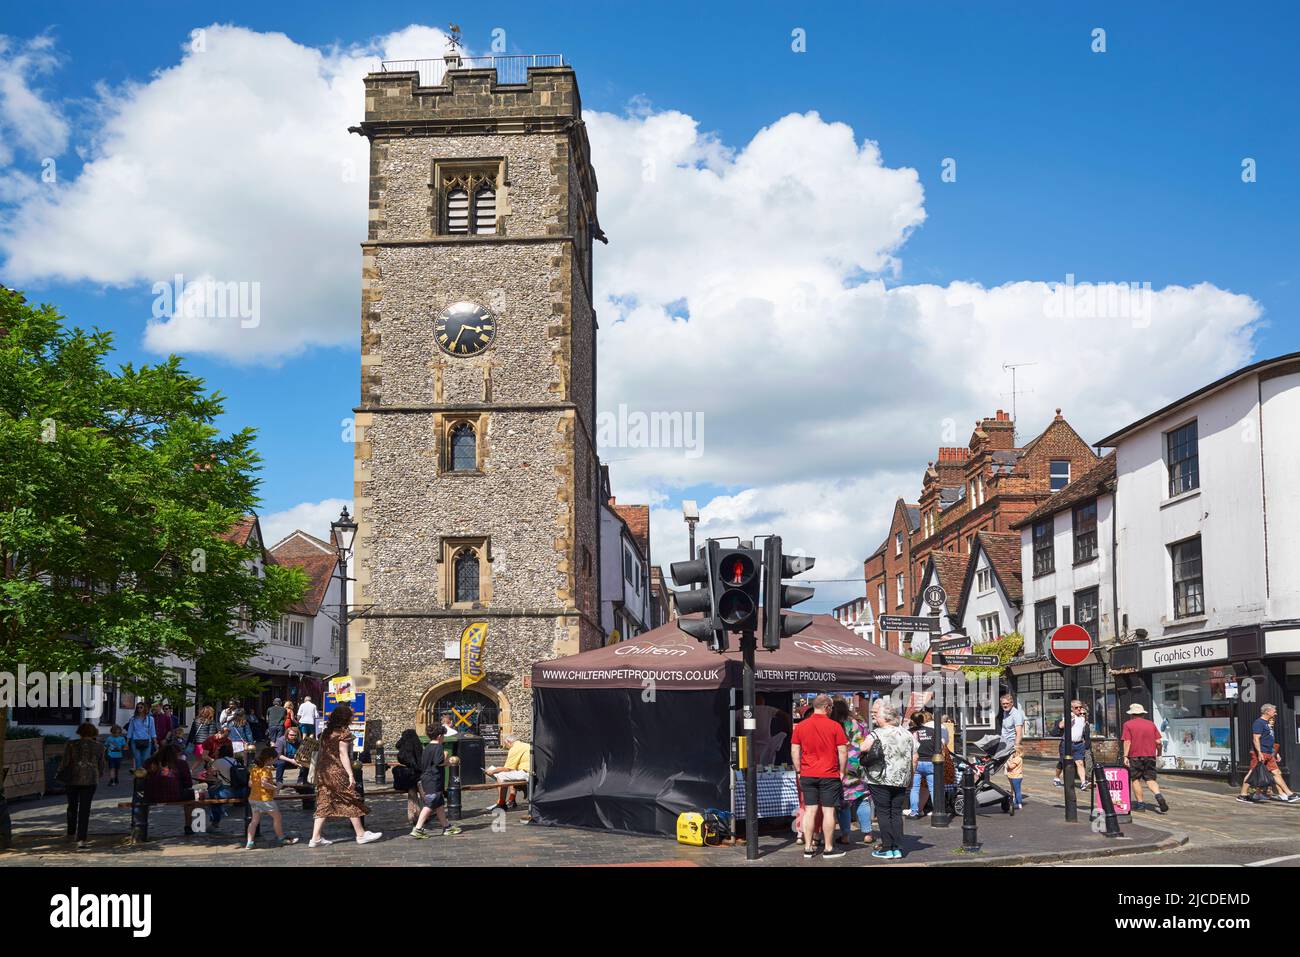 The medieval 15th century clocktower and market at Christopher Place Shopping Centre, central St Albans, Hertfordshire, South East England Stock Photo